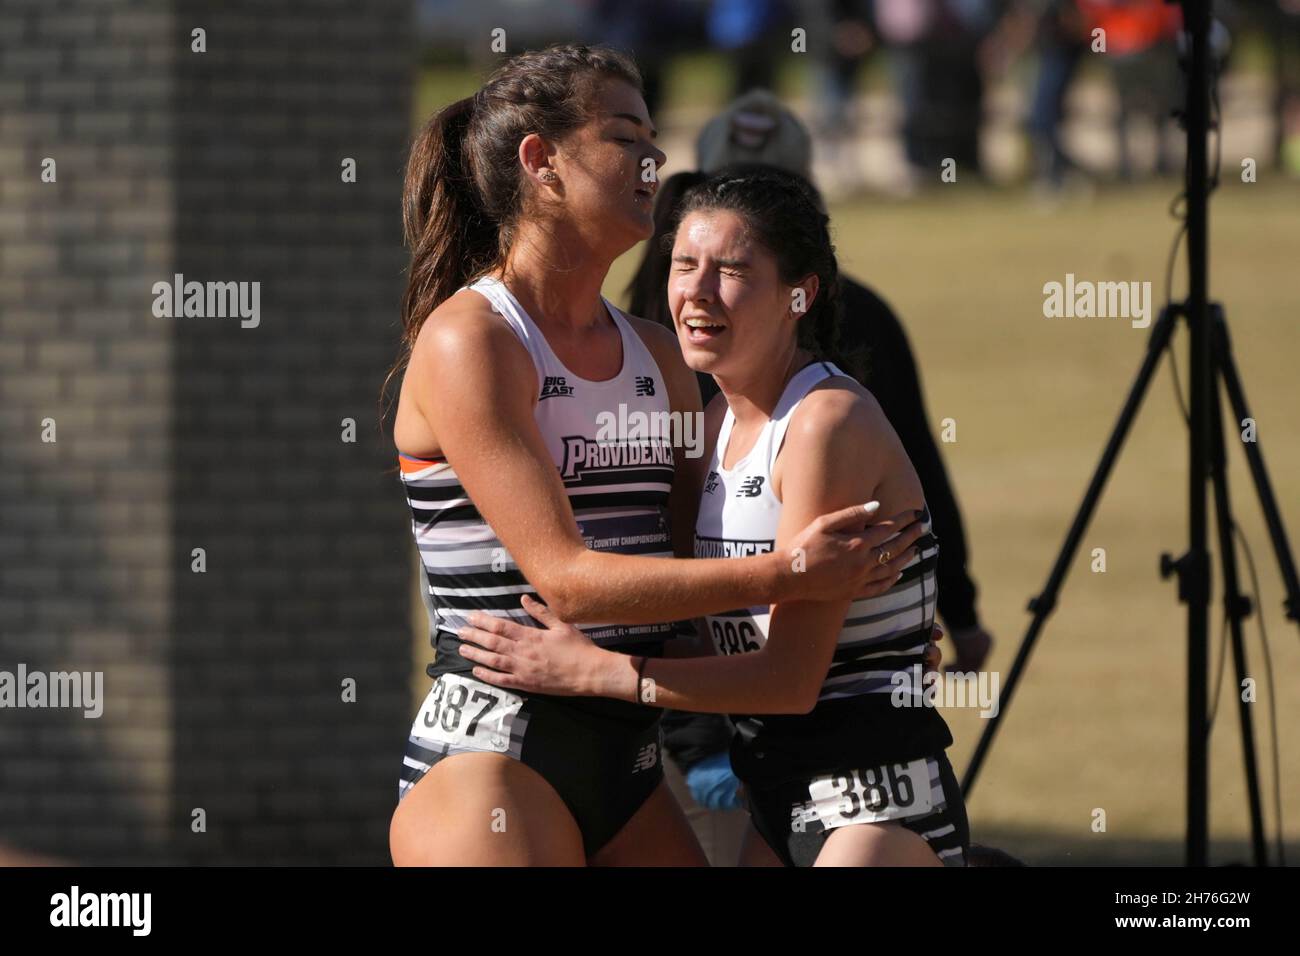 Orla O'Connor (386) and Alex O'Neill (387) of Providence embrace after the women's race during the NCAA cross country championships at Apalachee Regio Stock Photo